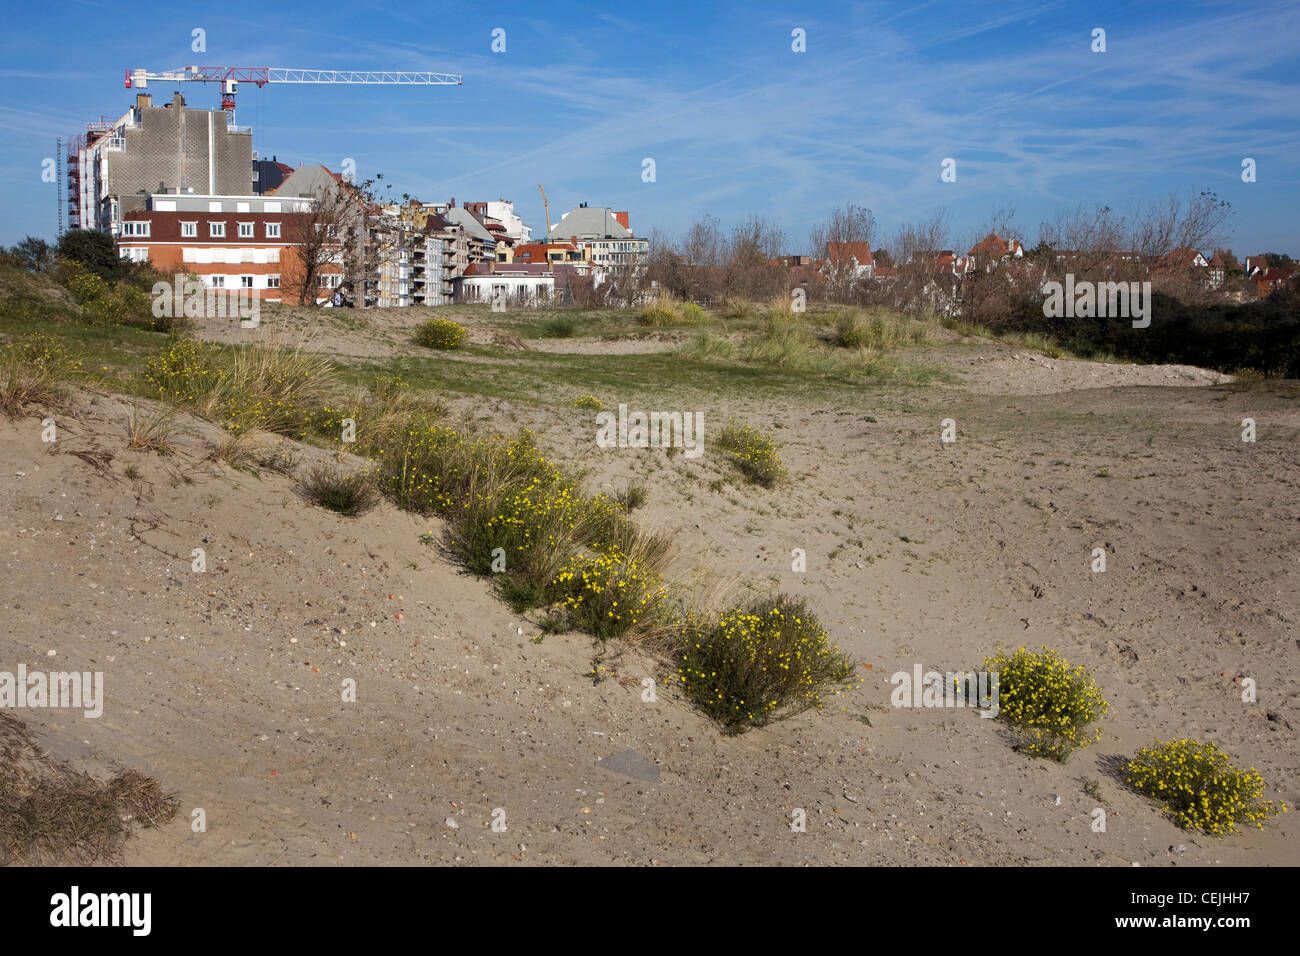 Dunes and advancing urbanization by building apartments along the Belgian North Sea coast, Knokke, Belgium Stock Photo